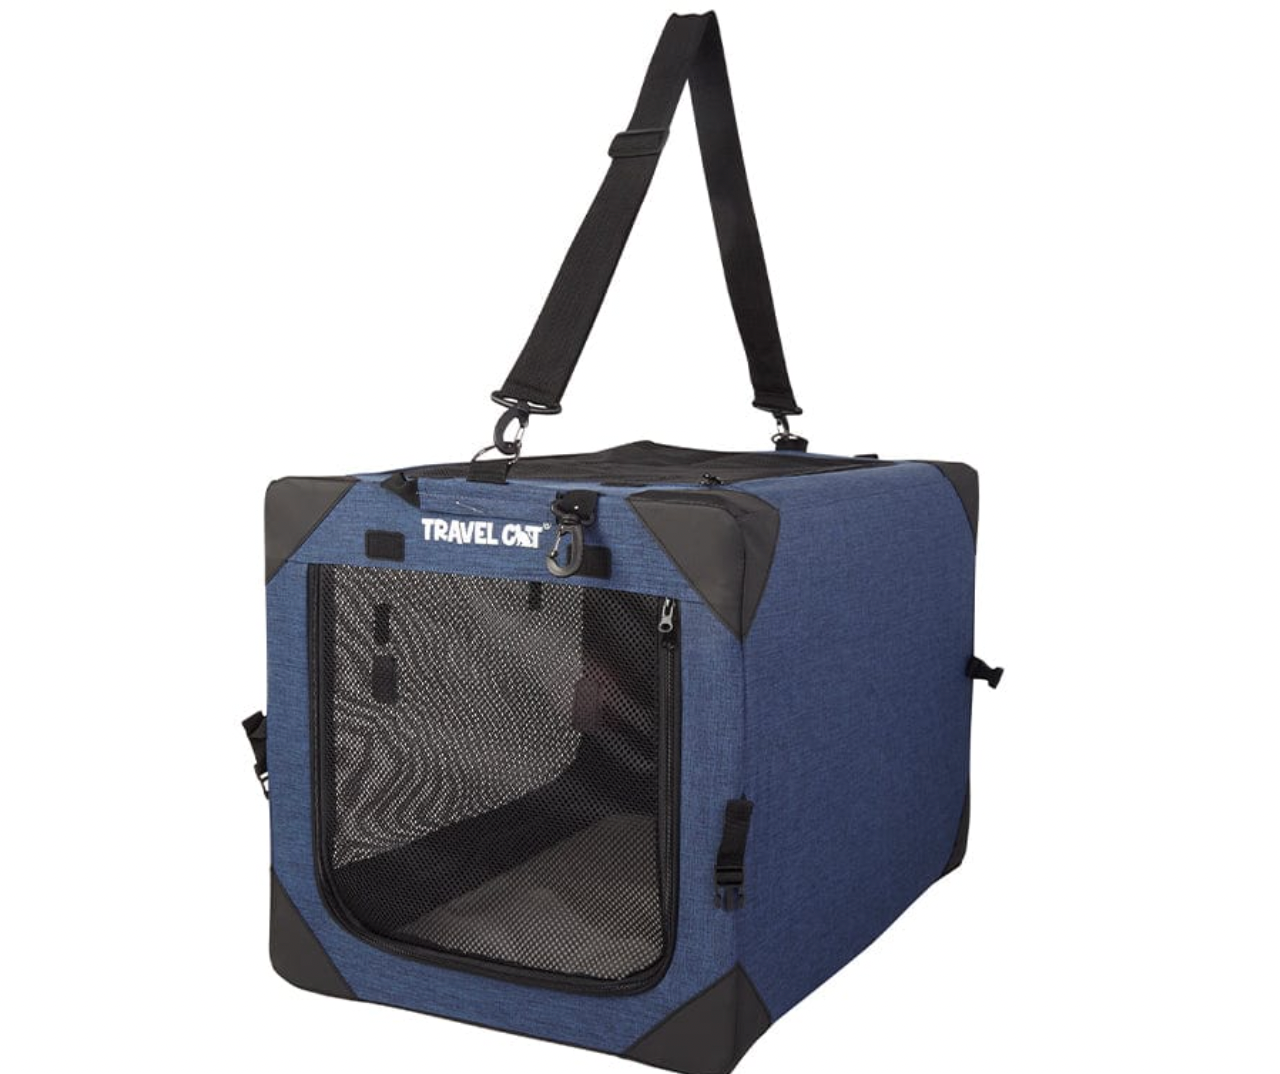 TRAVEL CAT "The Boop Coop" Collapsible Travel Cat Crate & Carrier